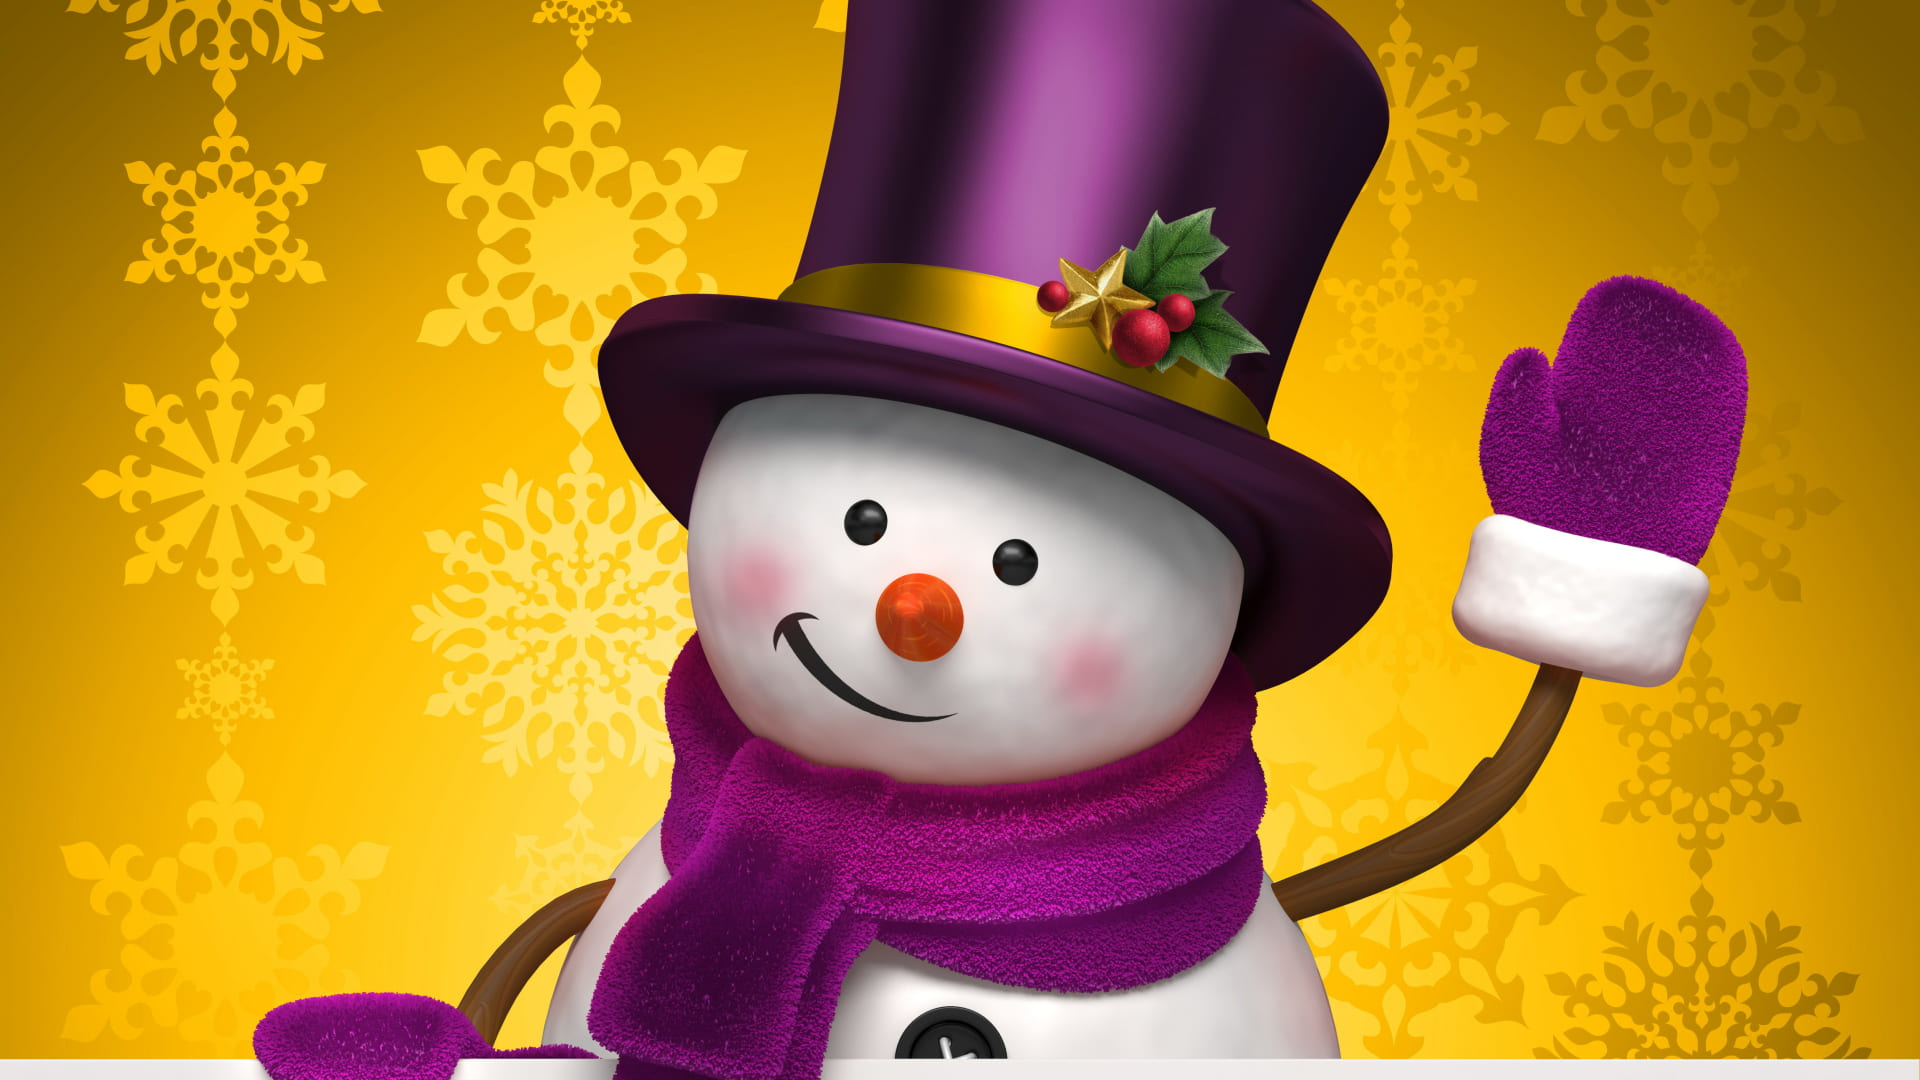 1920x1080 Snowman Wallpapers : Top Free Snowman Backgrounds, Pictures \u0026 Images Download